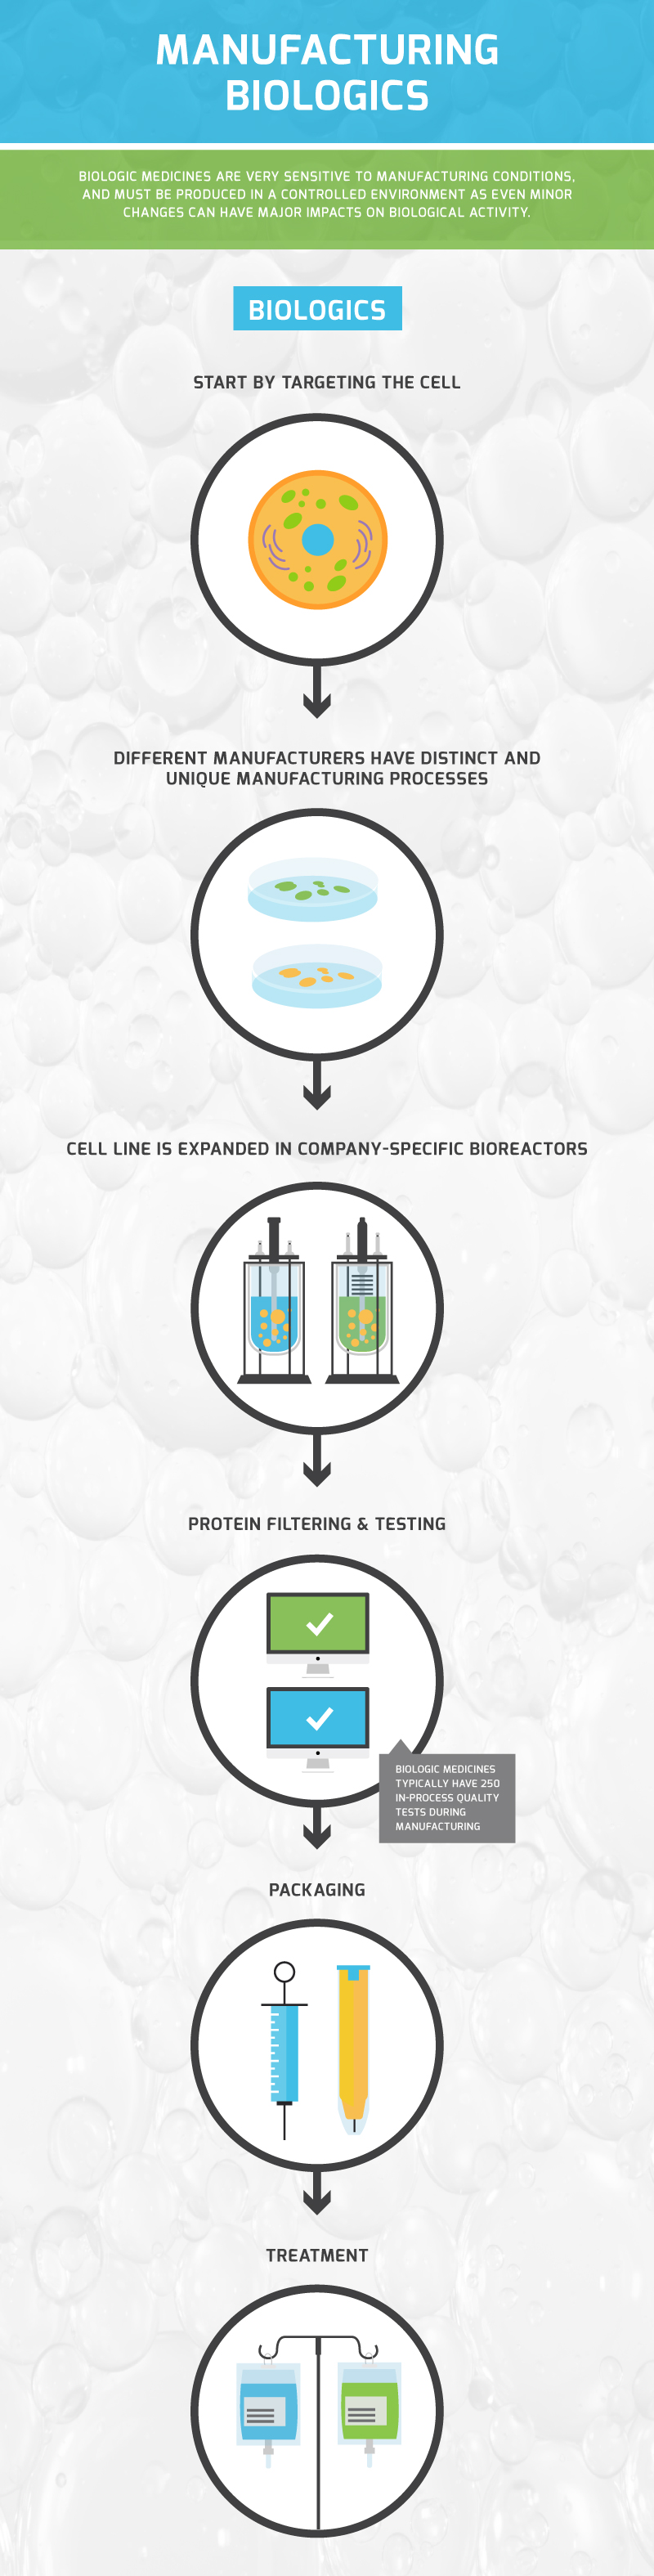 Manufacturing Biologics infographic detailing the manufacturing process of biologic medicines